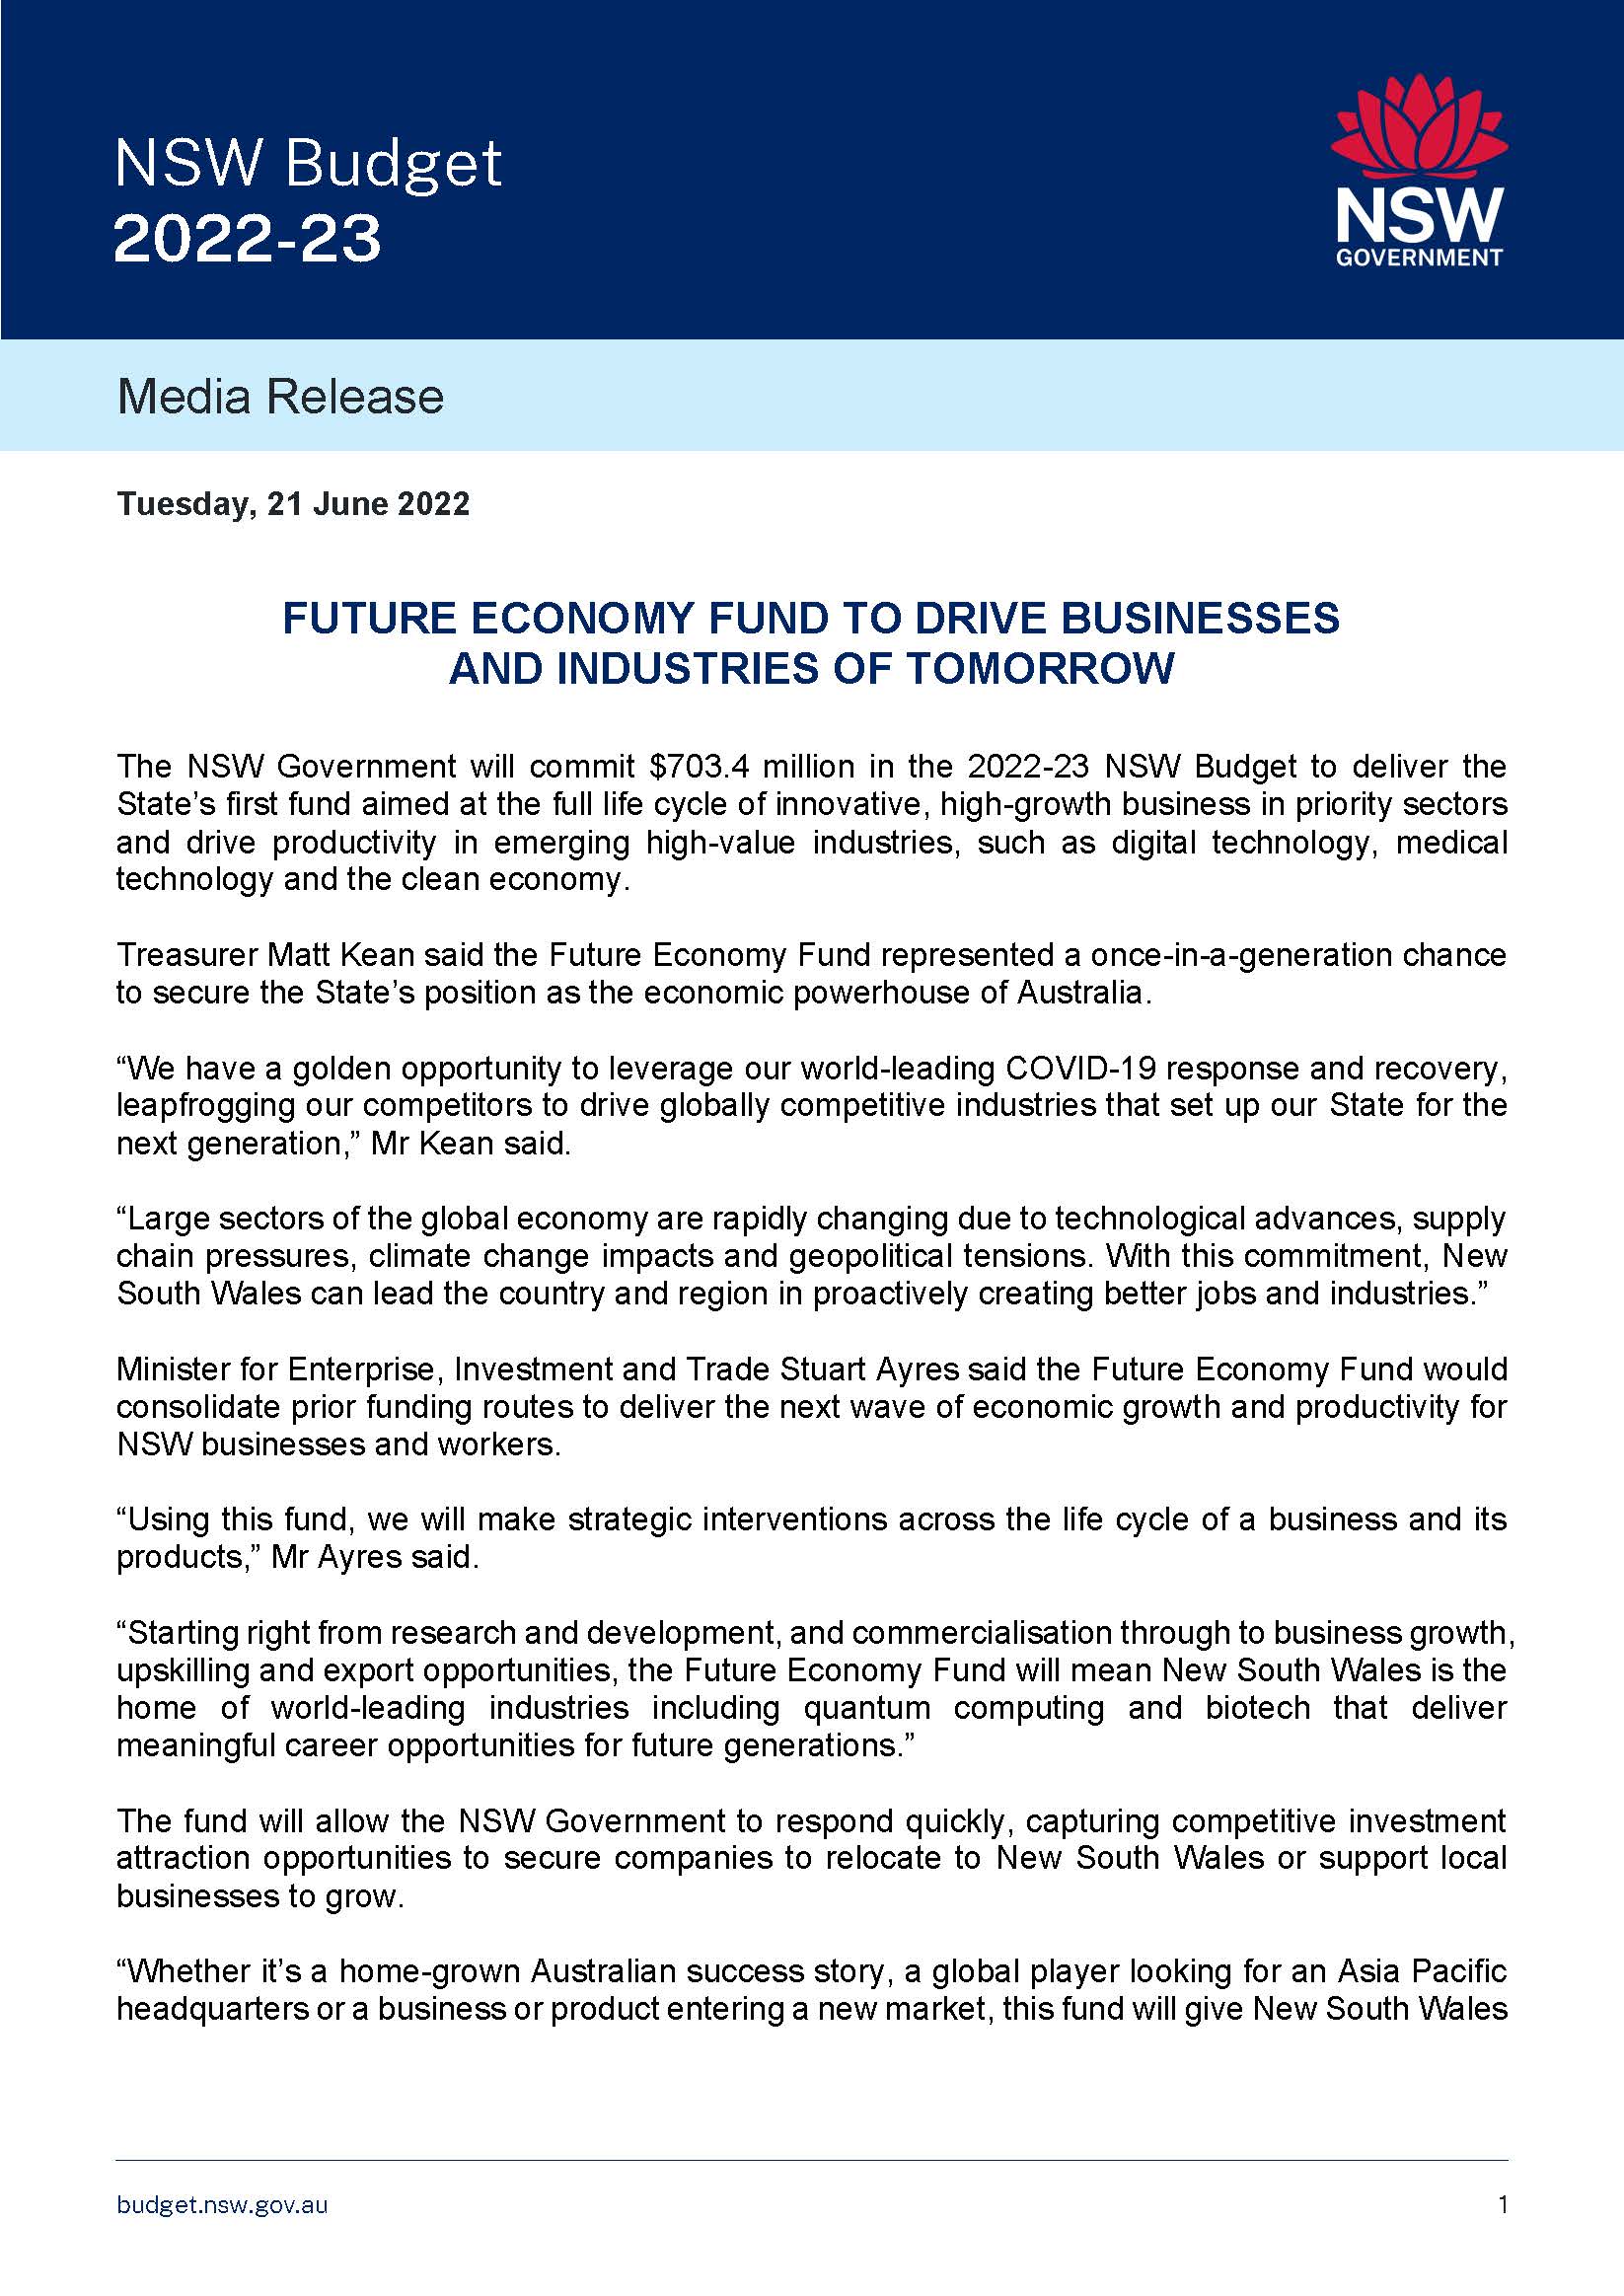 The NSW Government will commit $703.4 million in the 2022-23 NSW Budget to deliver the State's first fund aimed at the full life cycle of innovative, high-growth business in priority sectors and drive productivity in emerging high-value industries, such as digital technology, medical technology and the clean economy.  Treasurer Matt Kean said the Future Economy Fund represented a once-in-a-generation chance to secure the State's position as the economic powerhouse of Australia.   